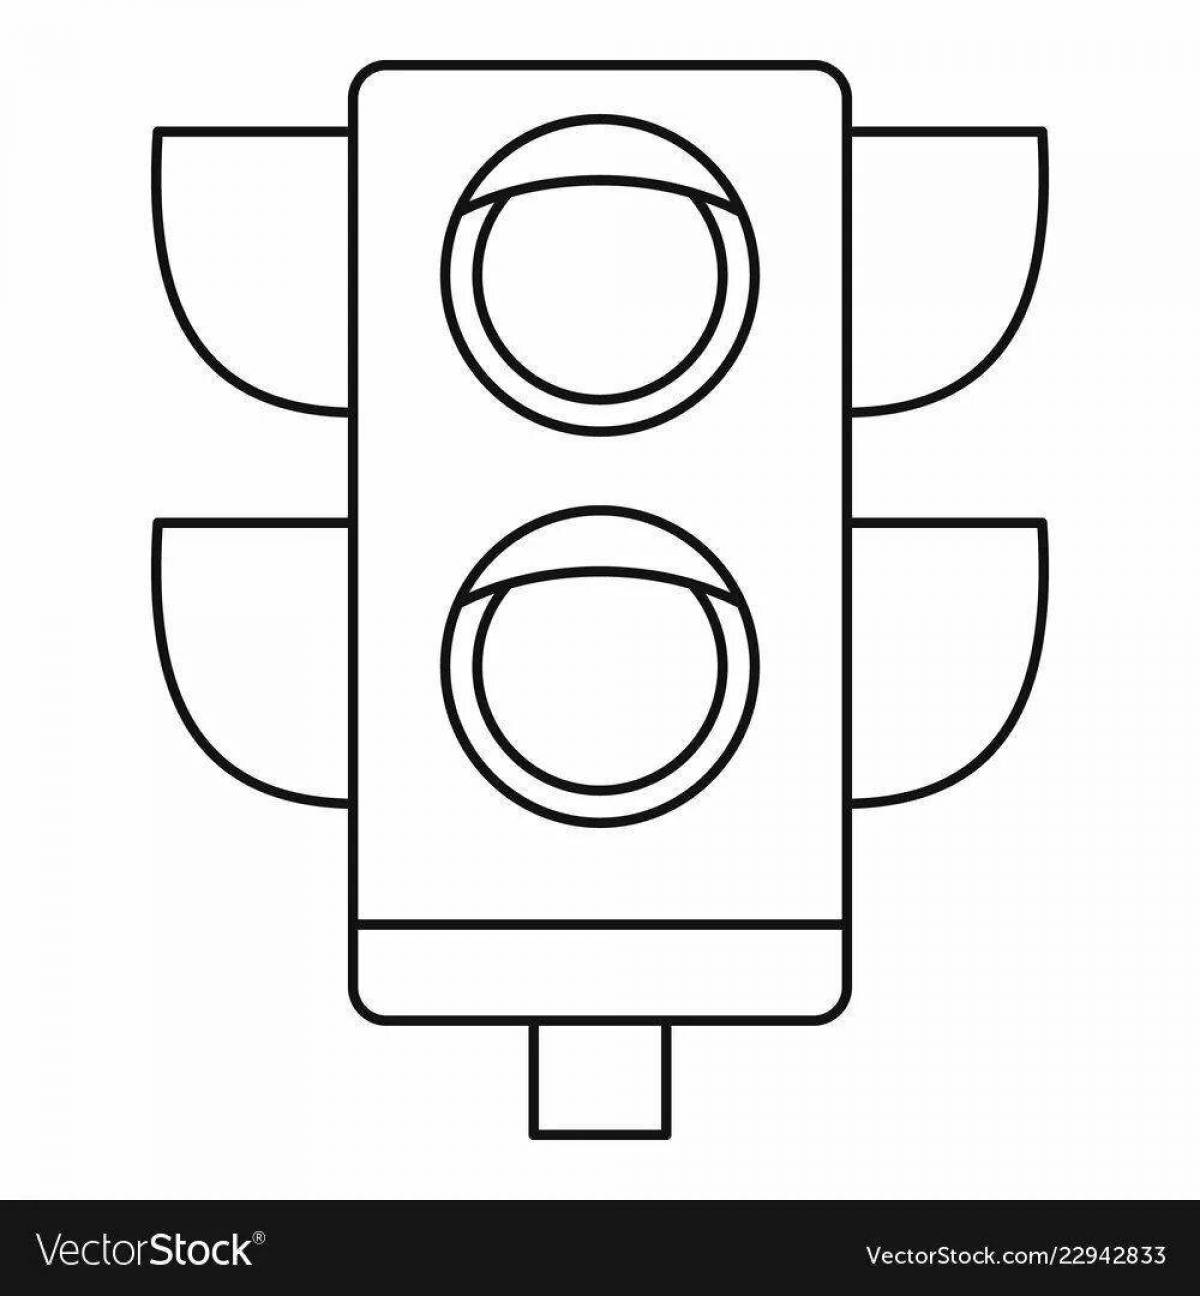 Animated traffic light coloring page